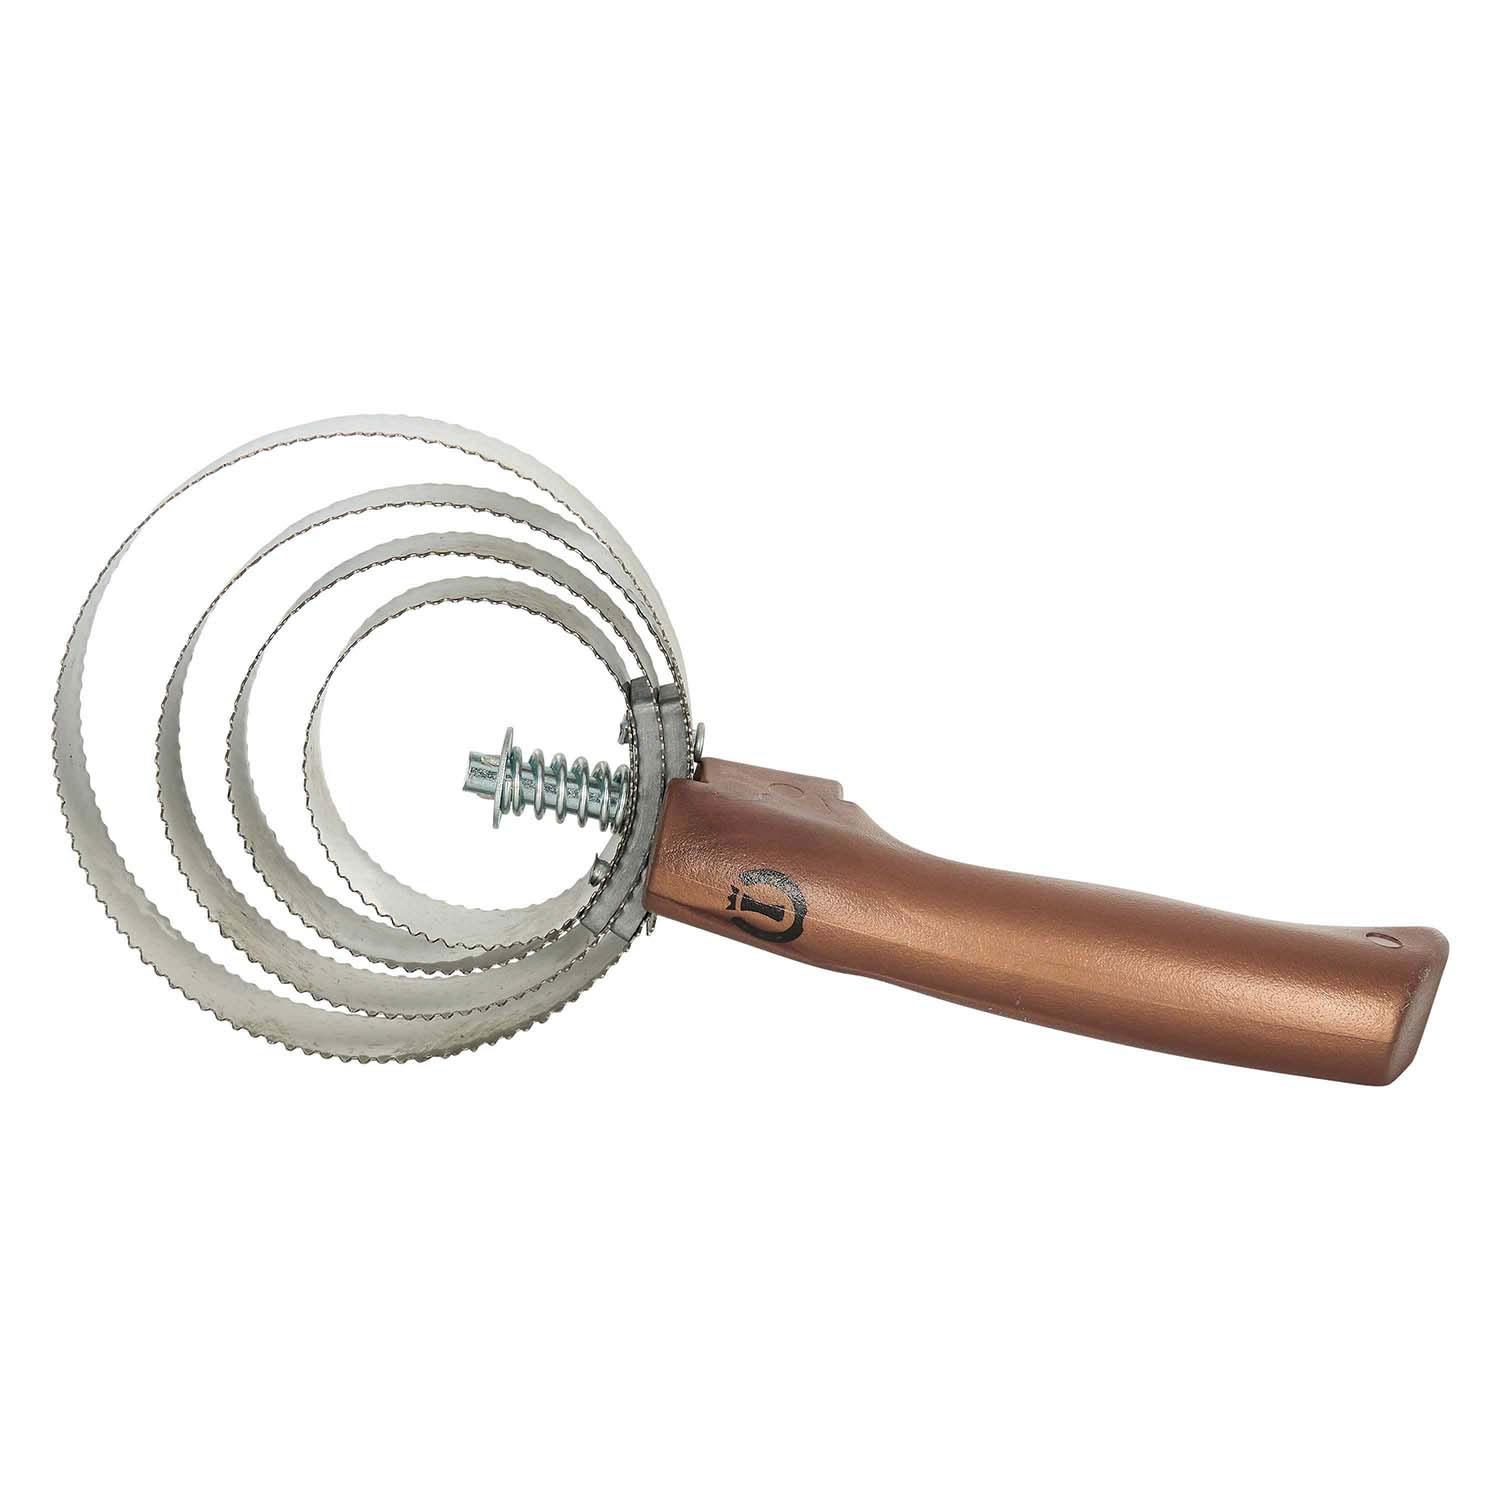 IMPERIAL RIDING SPRING COMB ROUND WITH HANDLE